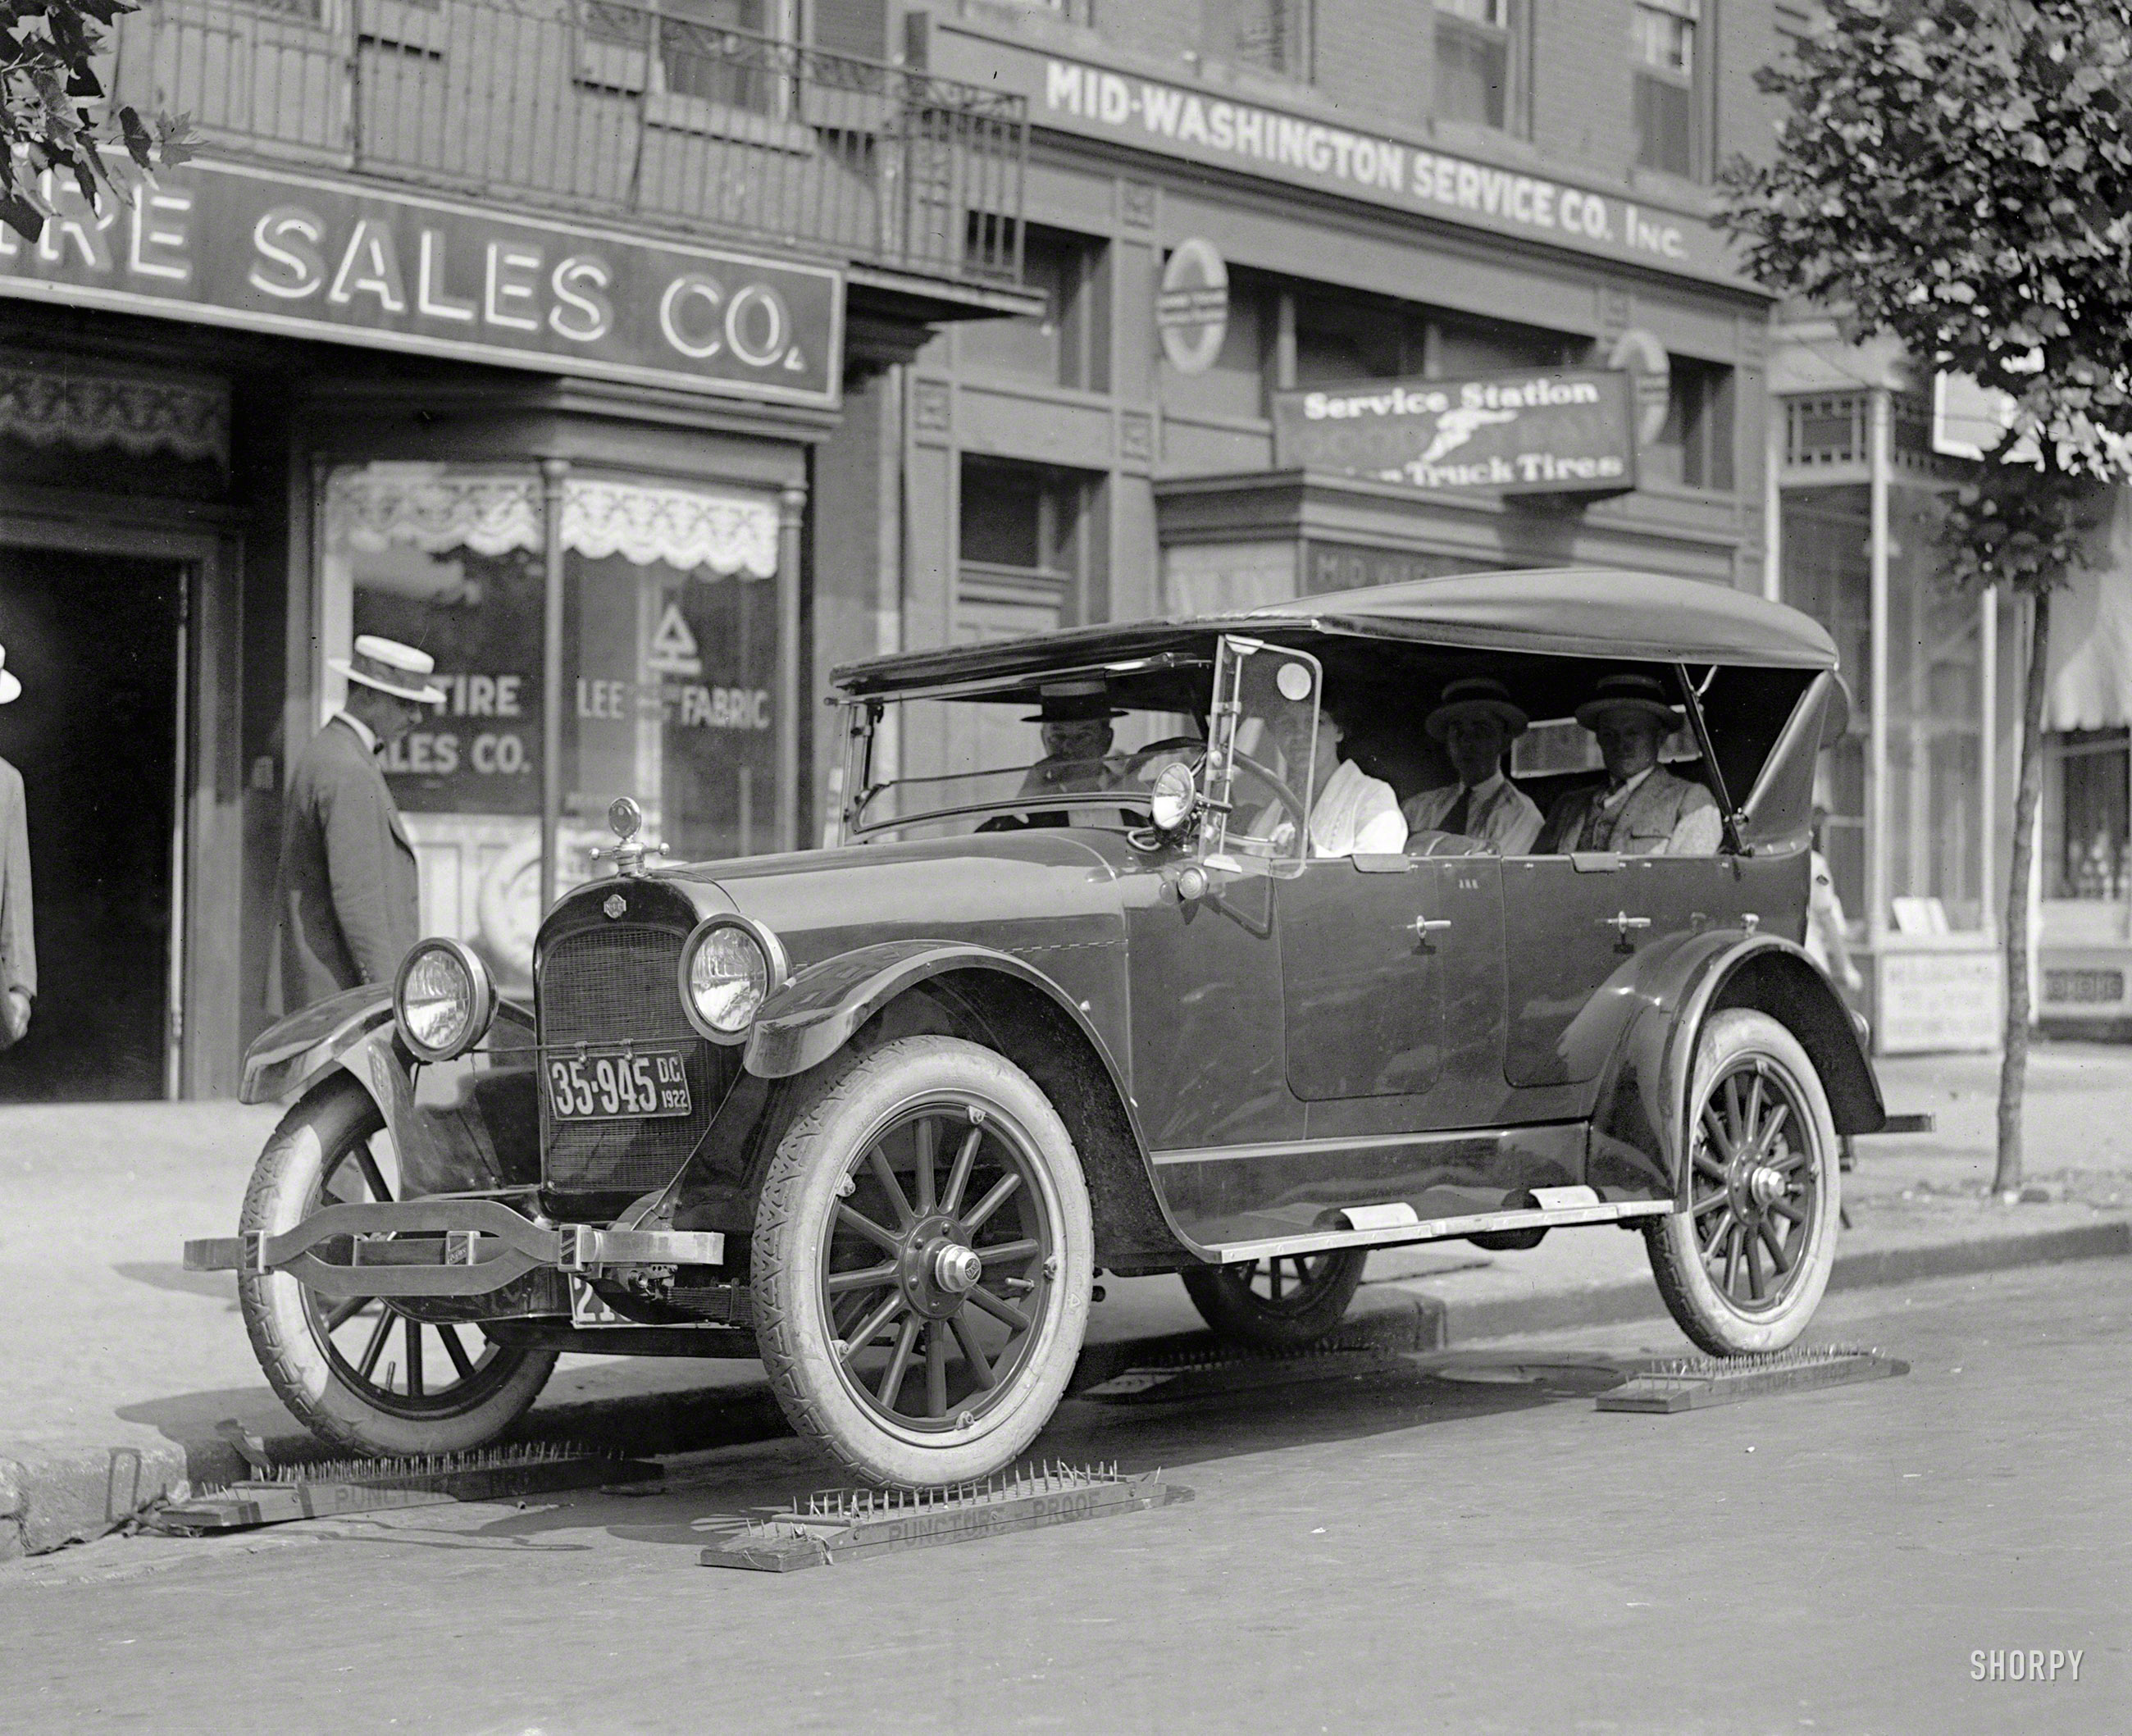 Washington, D.C., 1922. "Lee Tire Co. test." The tire to get if you plan on driving over dozens of nails simultaneously.  National Photo Co. View full size.